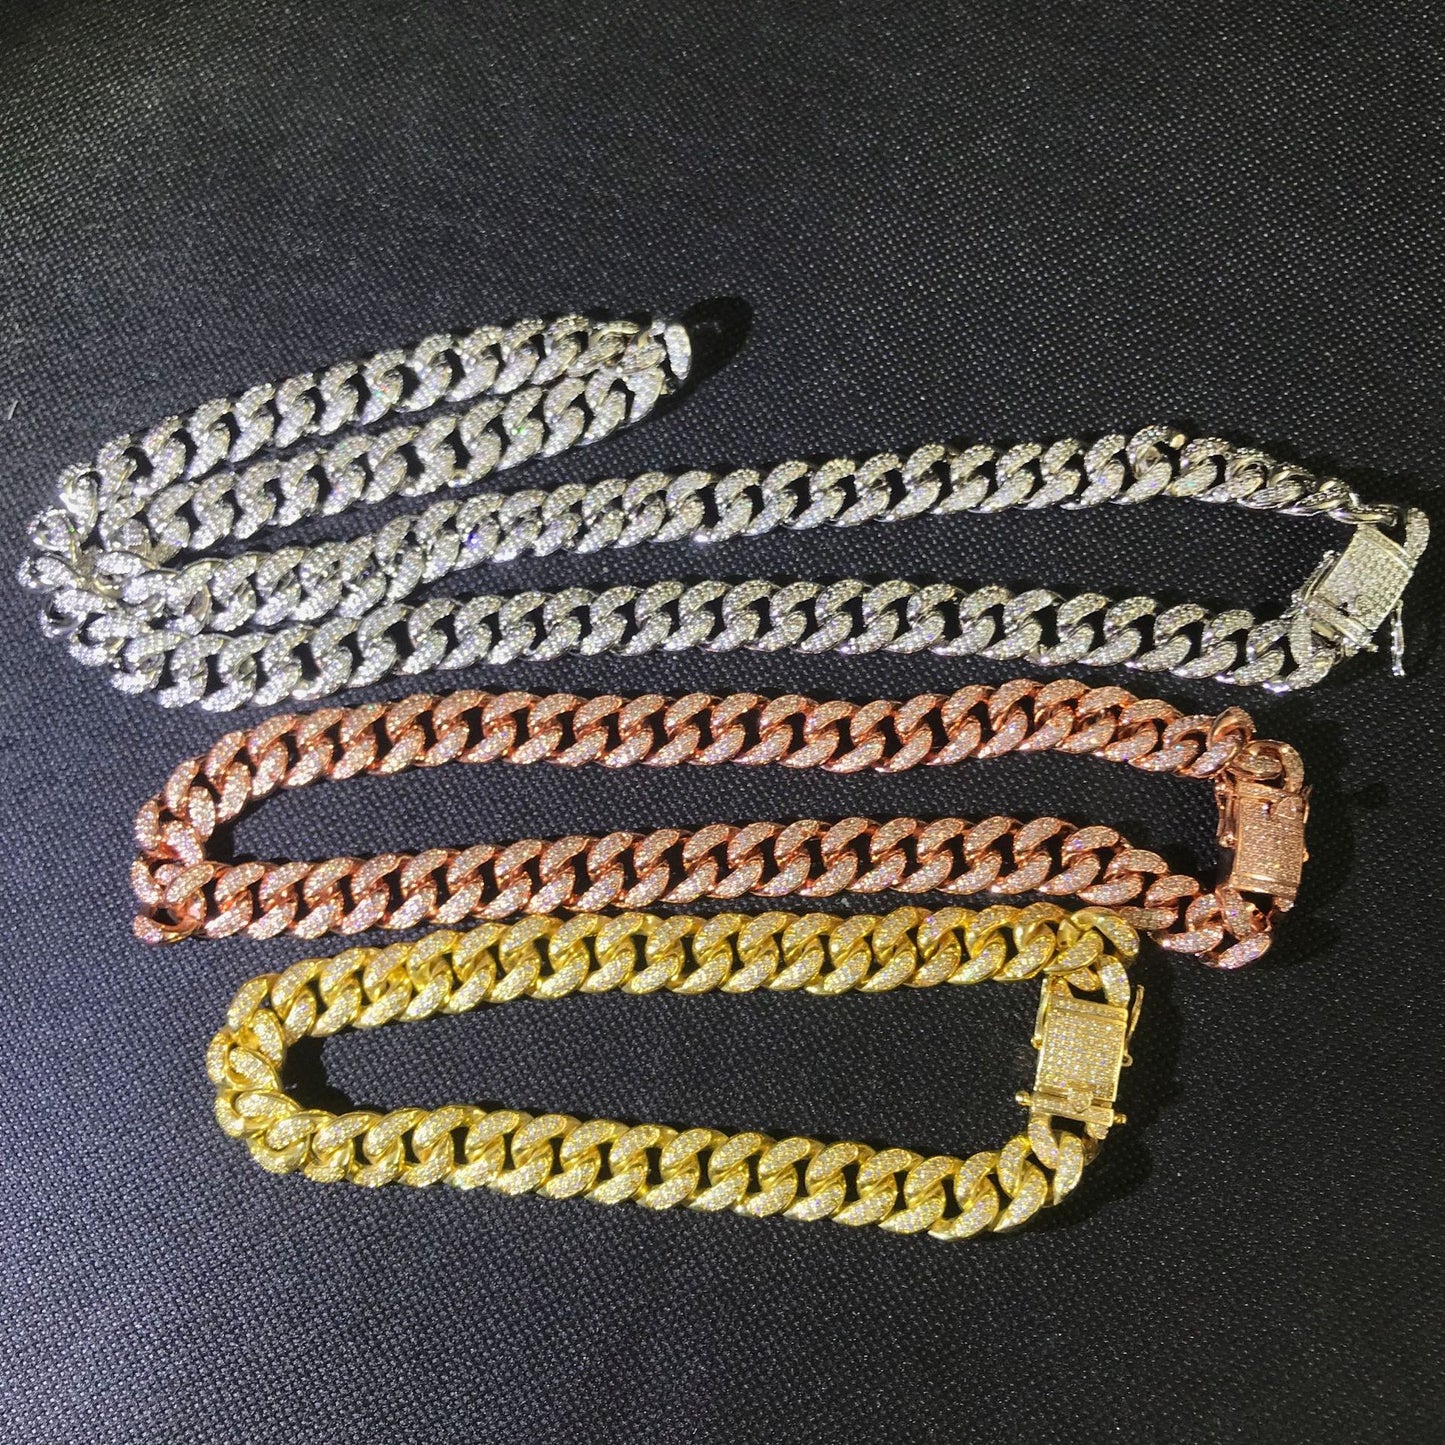 four different colors of chain on a black surface